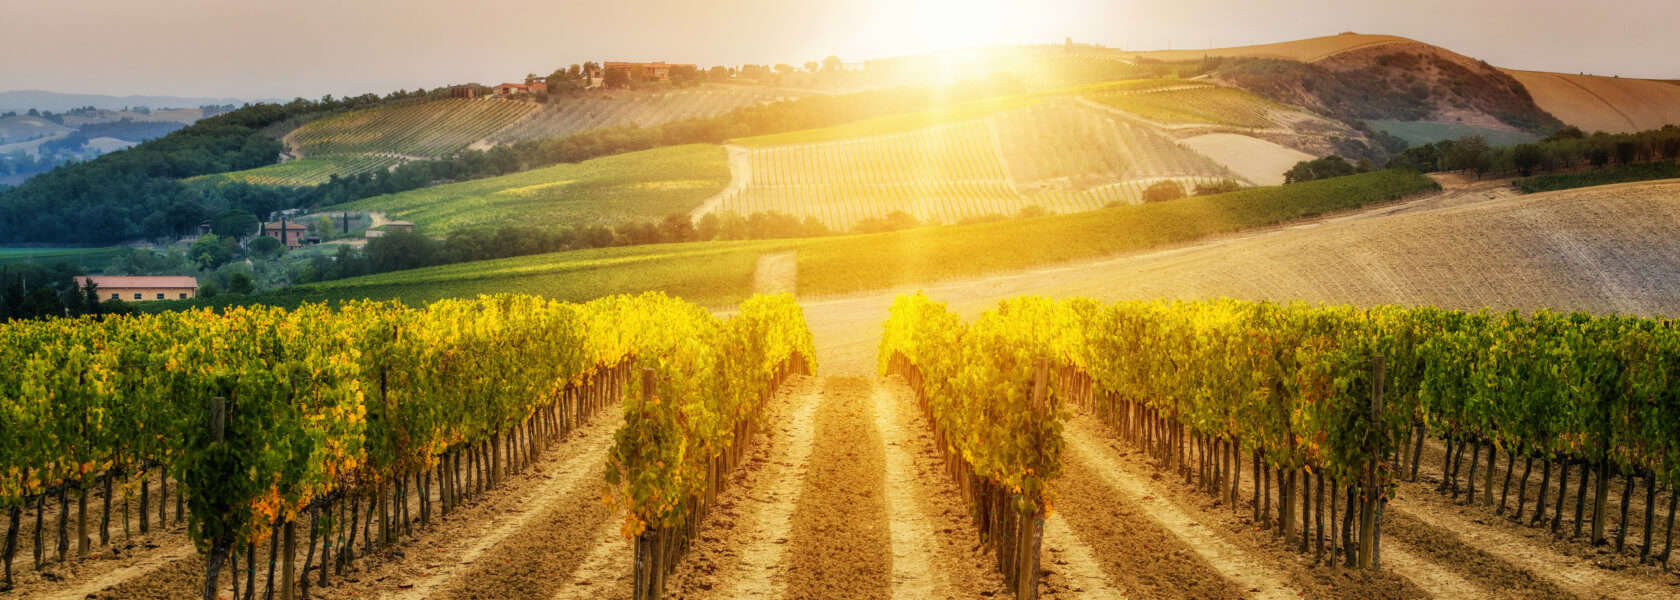 The Best Wine Making Regions In The World Italy